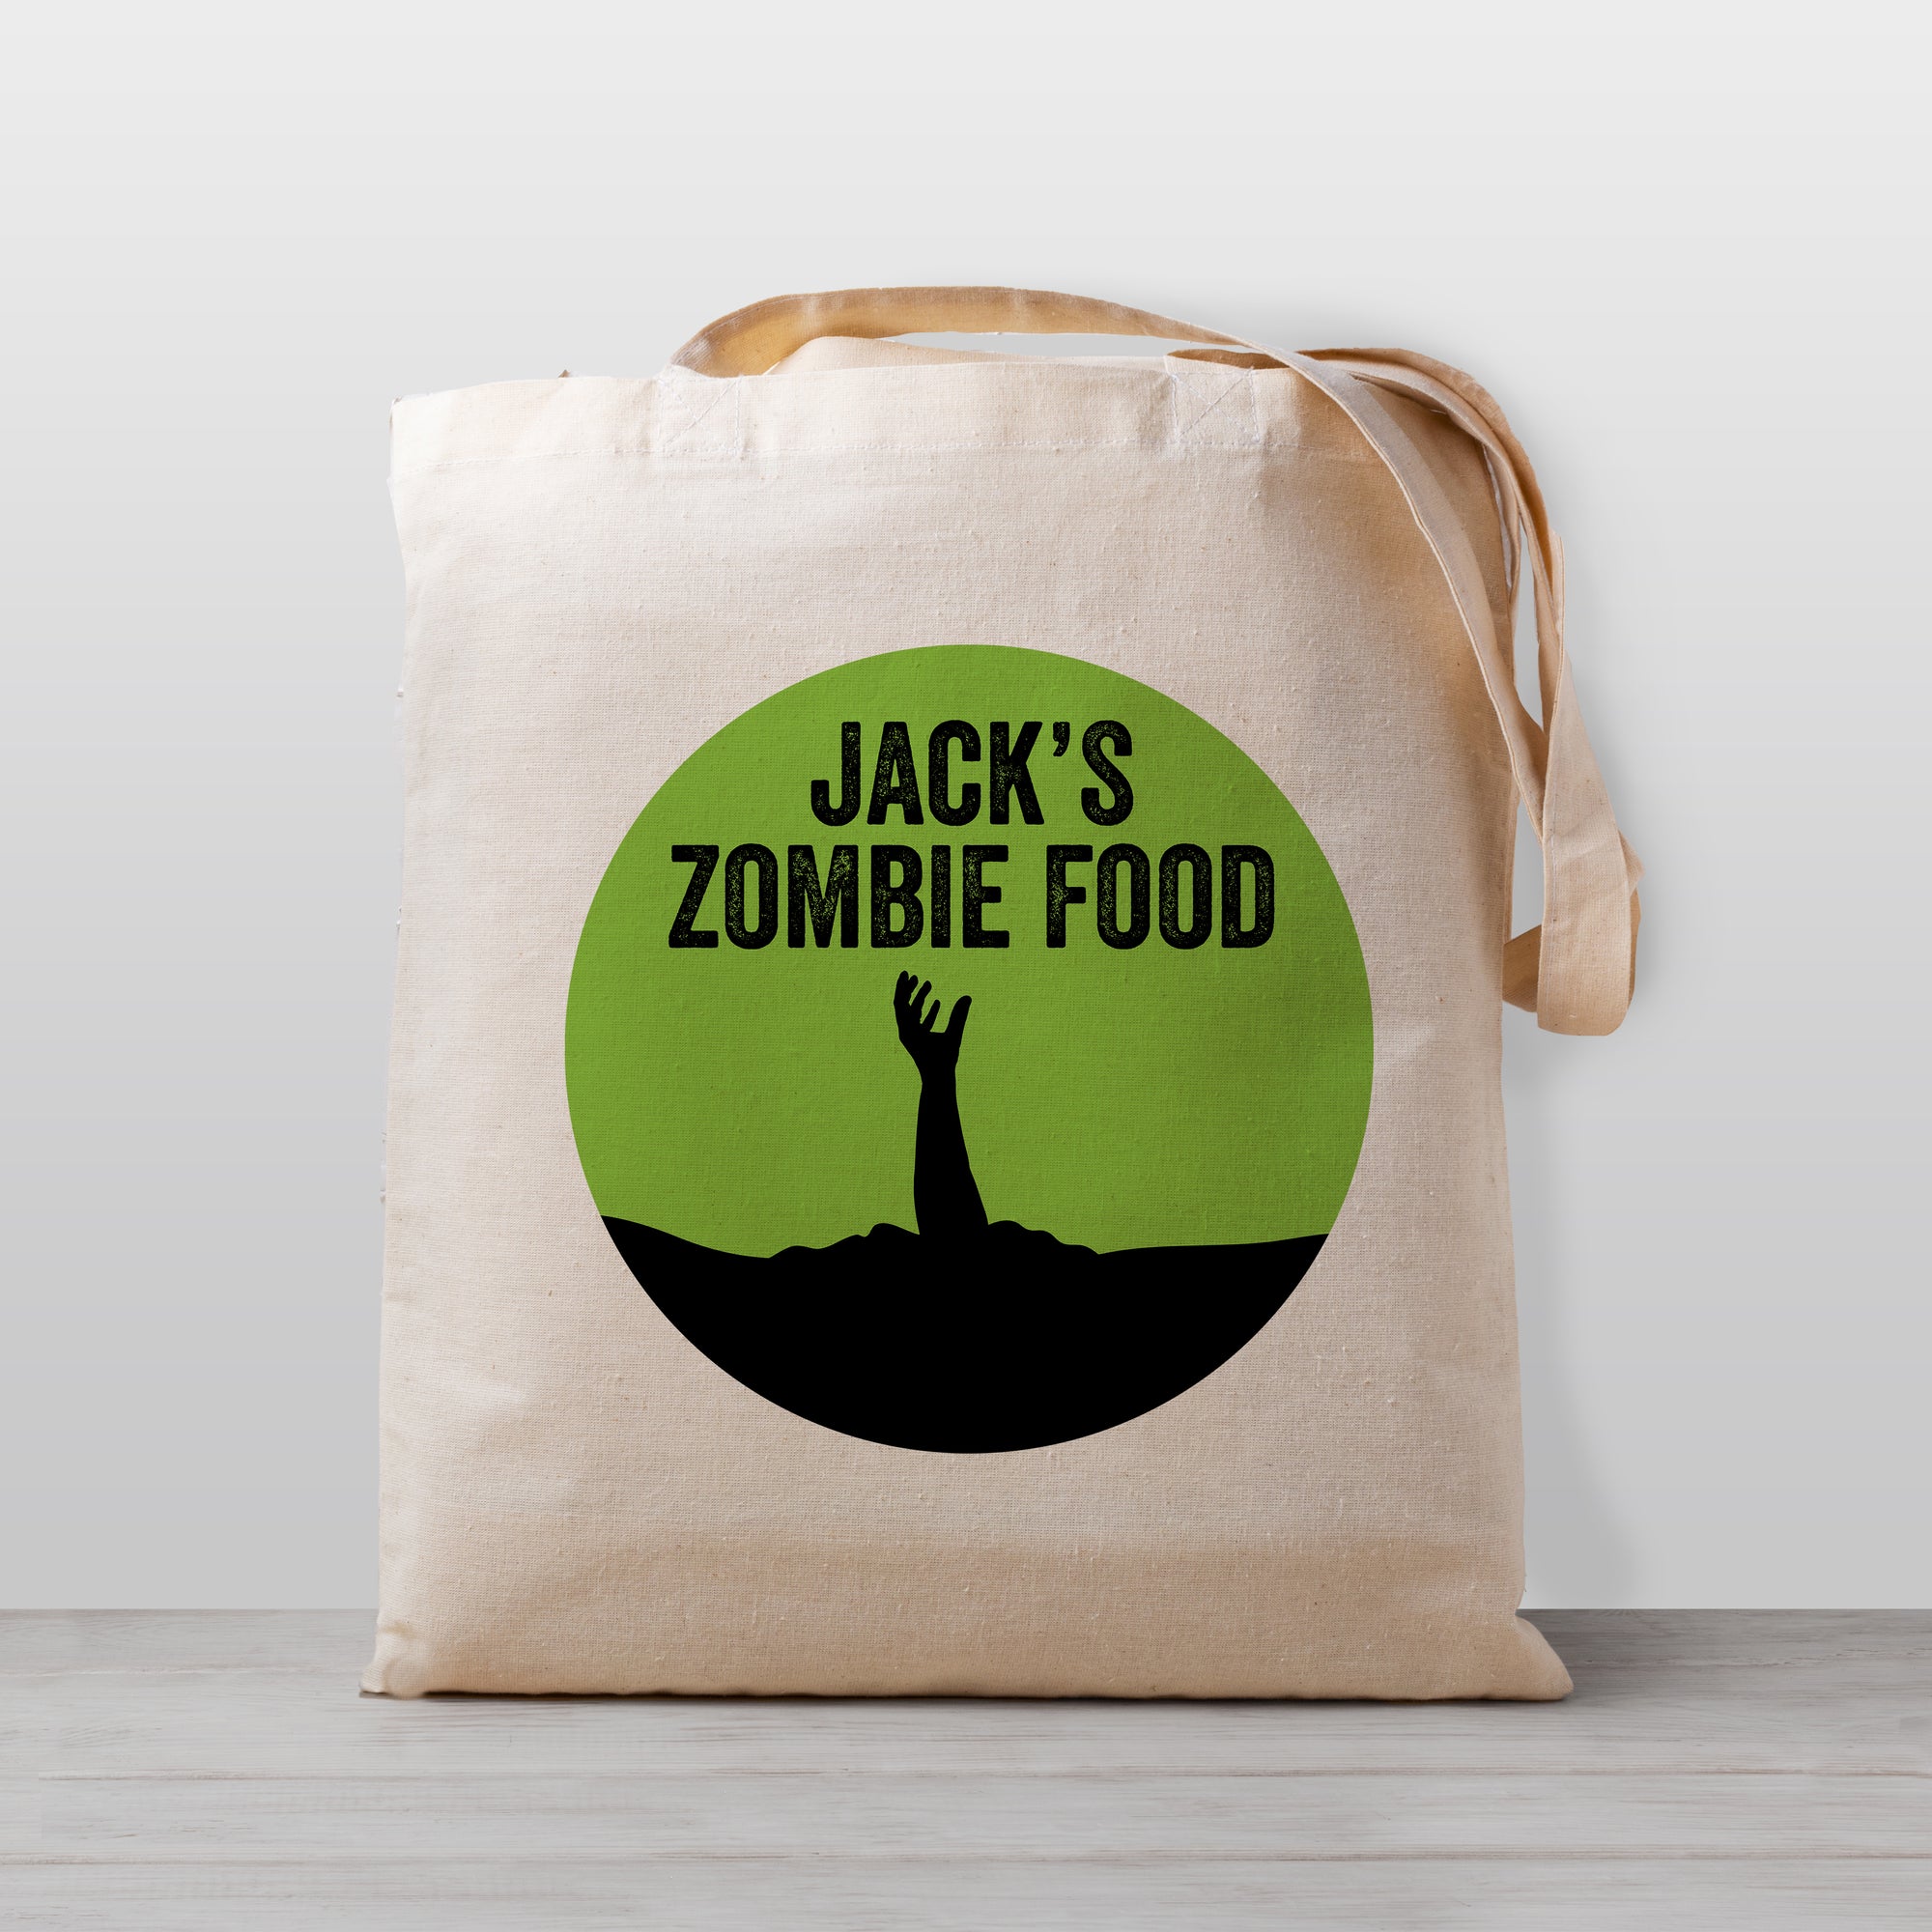 Zombie Halloween Trick or Treat Bag, Personalized with your child's name, 100% natural cotton canvas